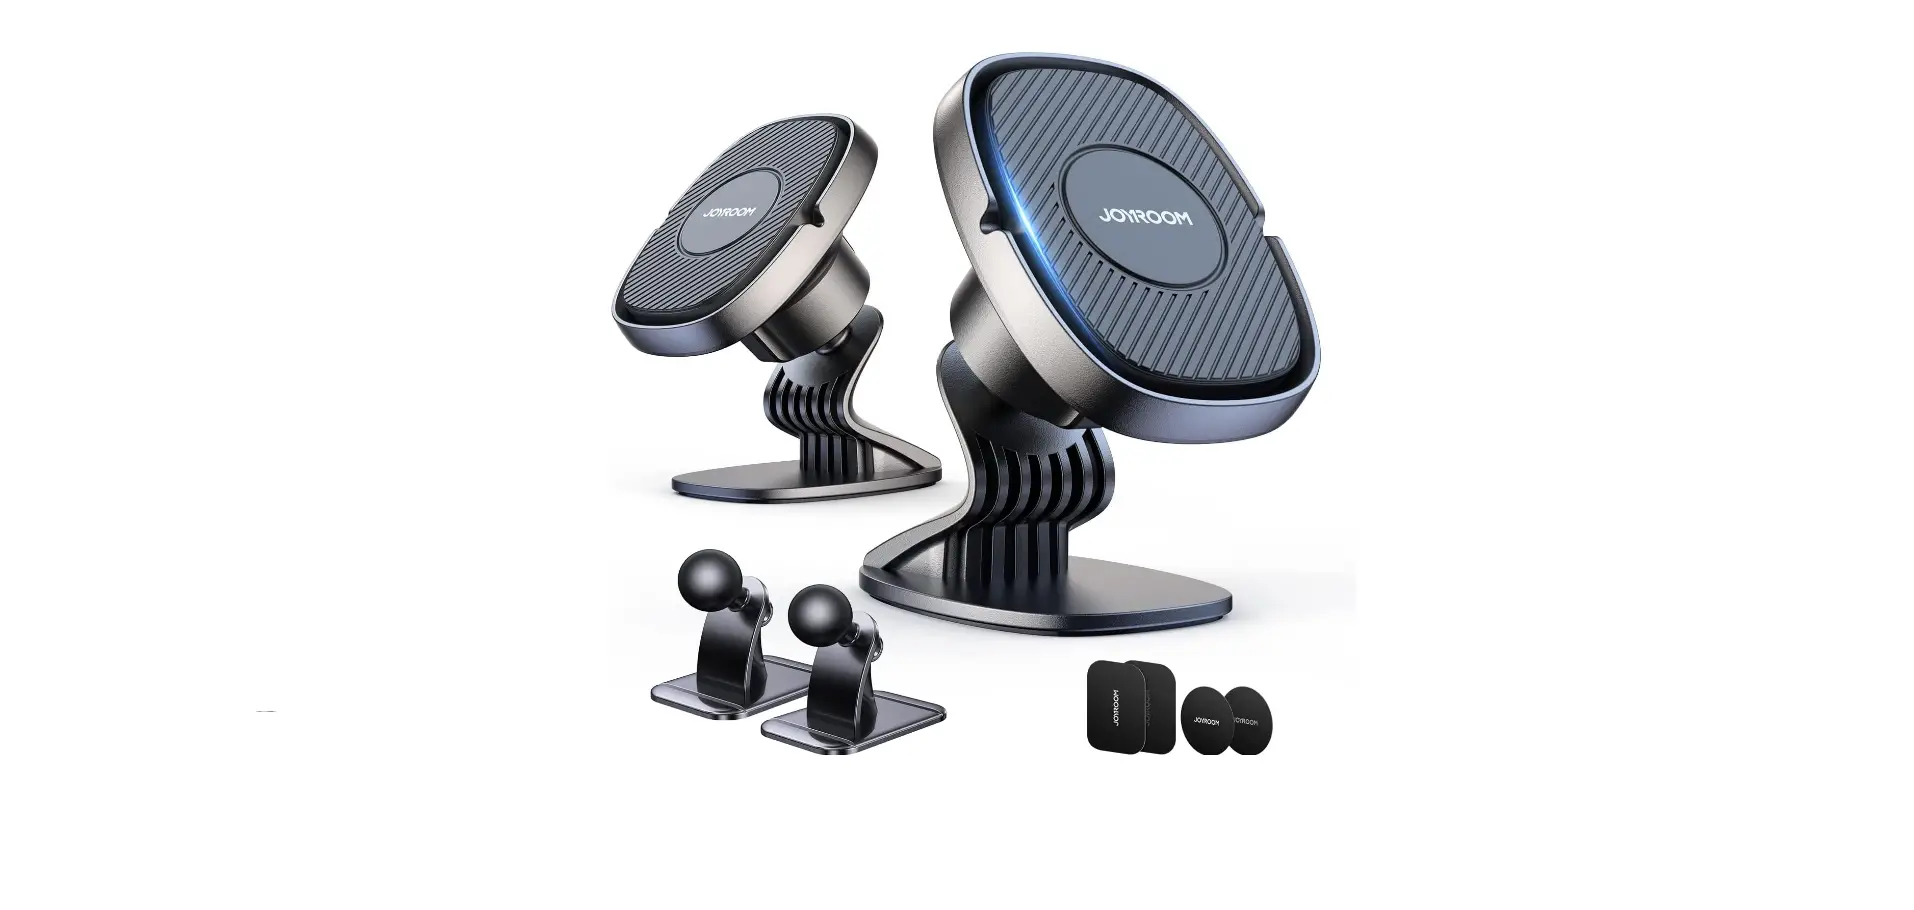 2 Pack【6 Strong Magnets】 Magnetic Car Phone Mount Holder, Universal Cell Phone Holder for Car Dashboard, 360° Rotation Car Smartphone Cradle Fit for iPhone 11 Pro Max/Xs Max/XR/X